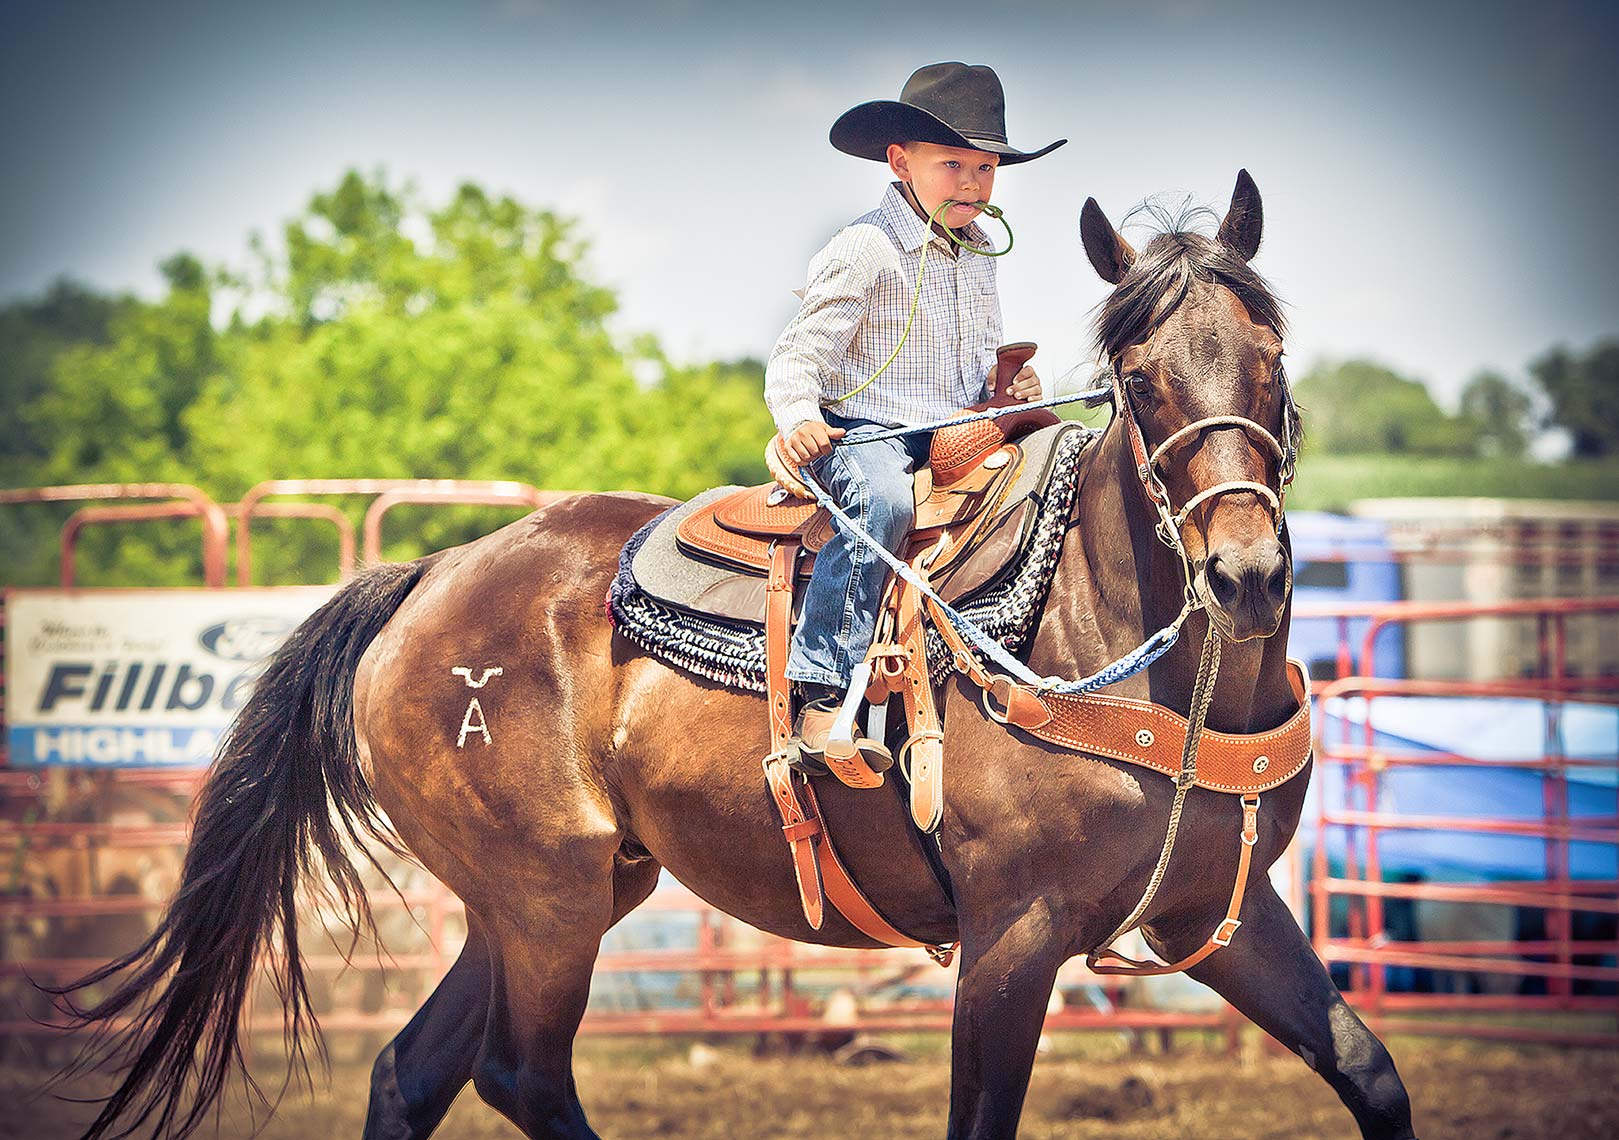 John Sibilski Photography | Trade show photography Chicago LITTLE BRITCHES RODEO 4